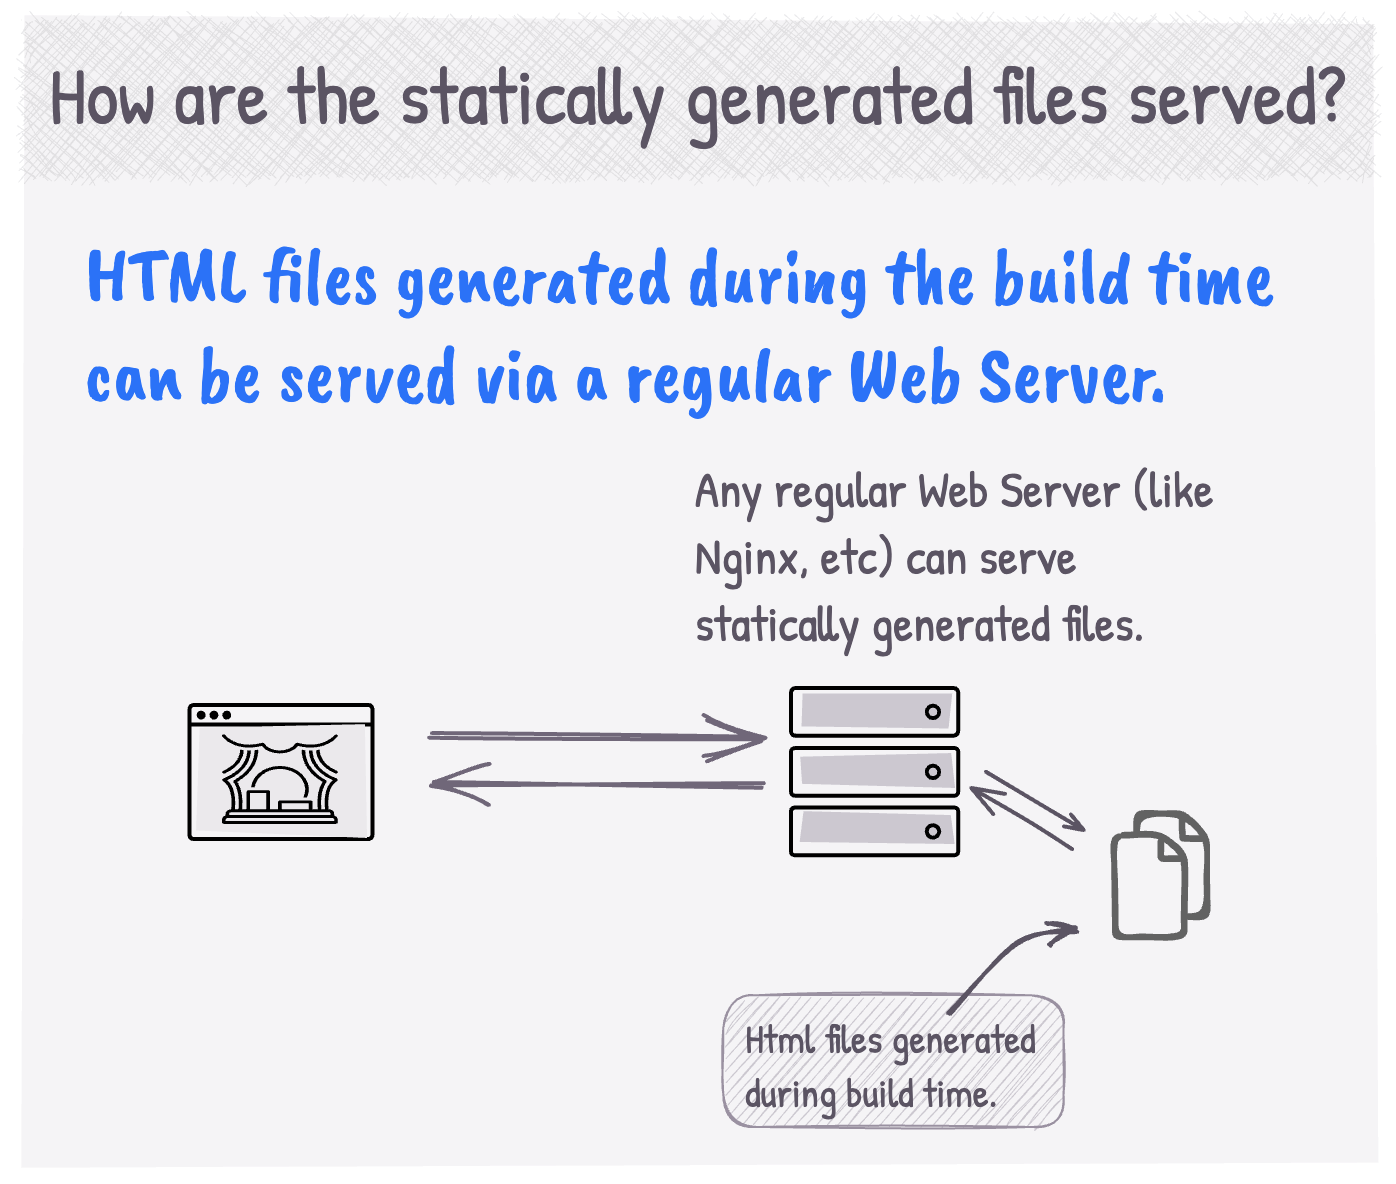 How are the statically generated files served?